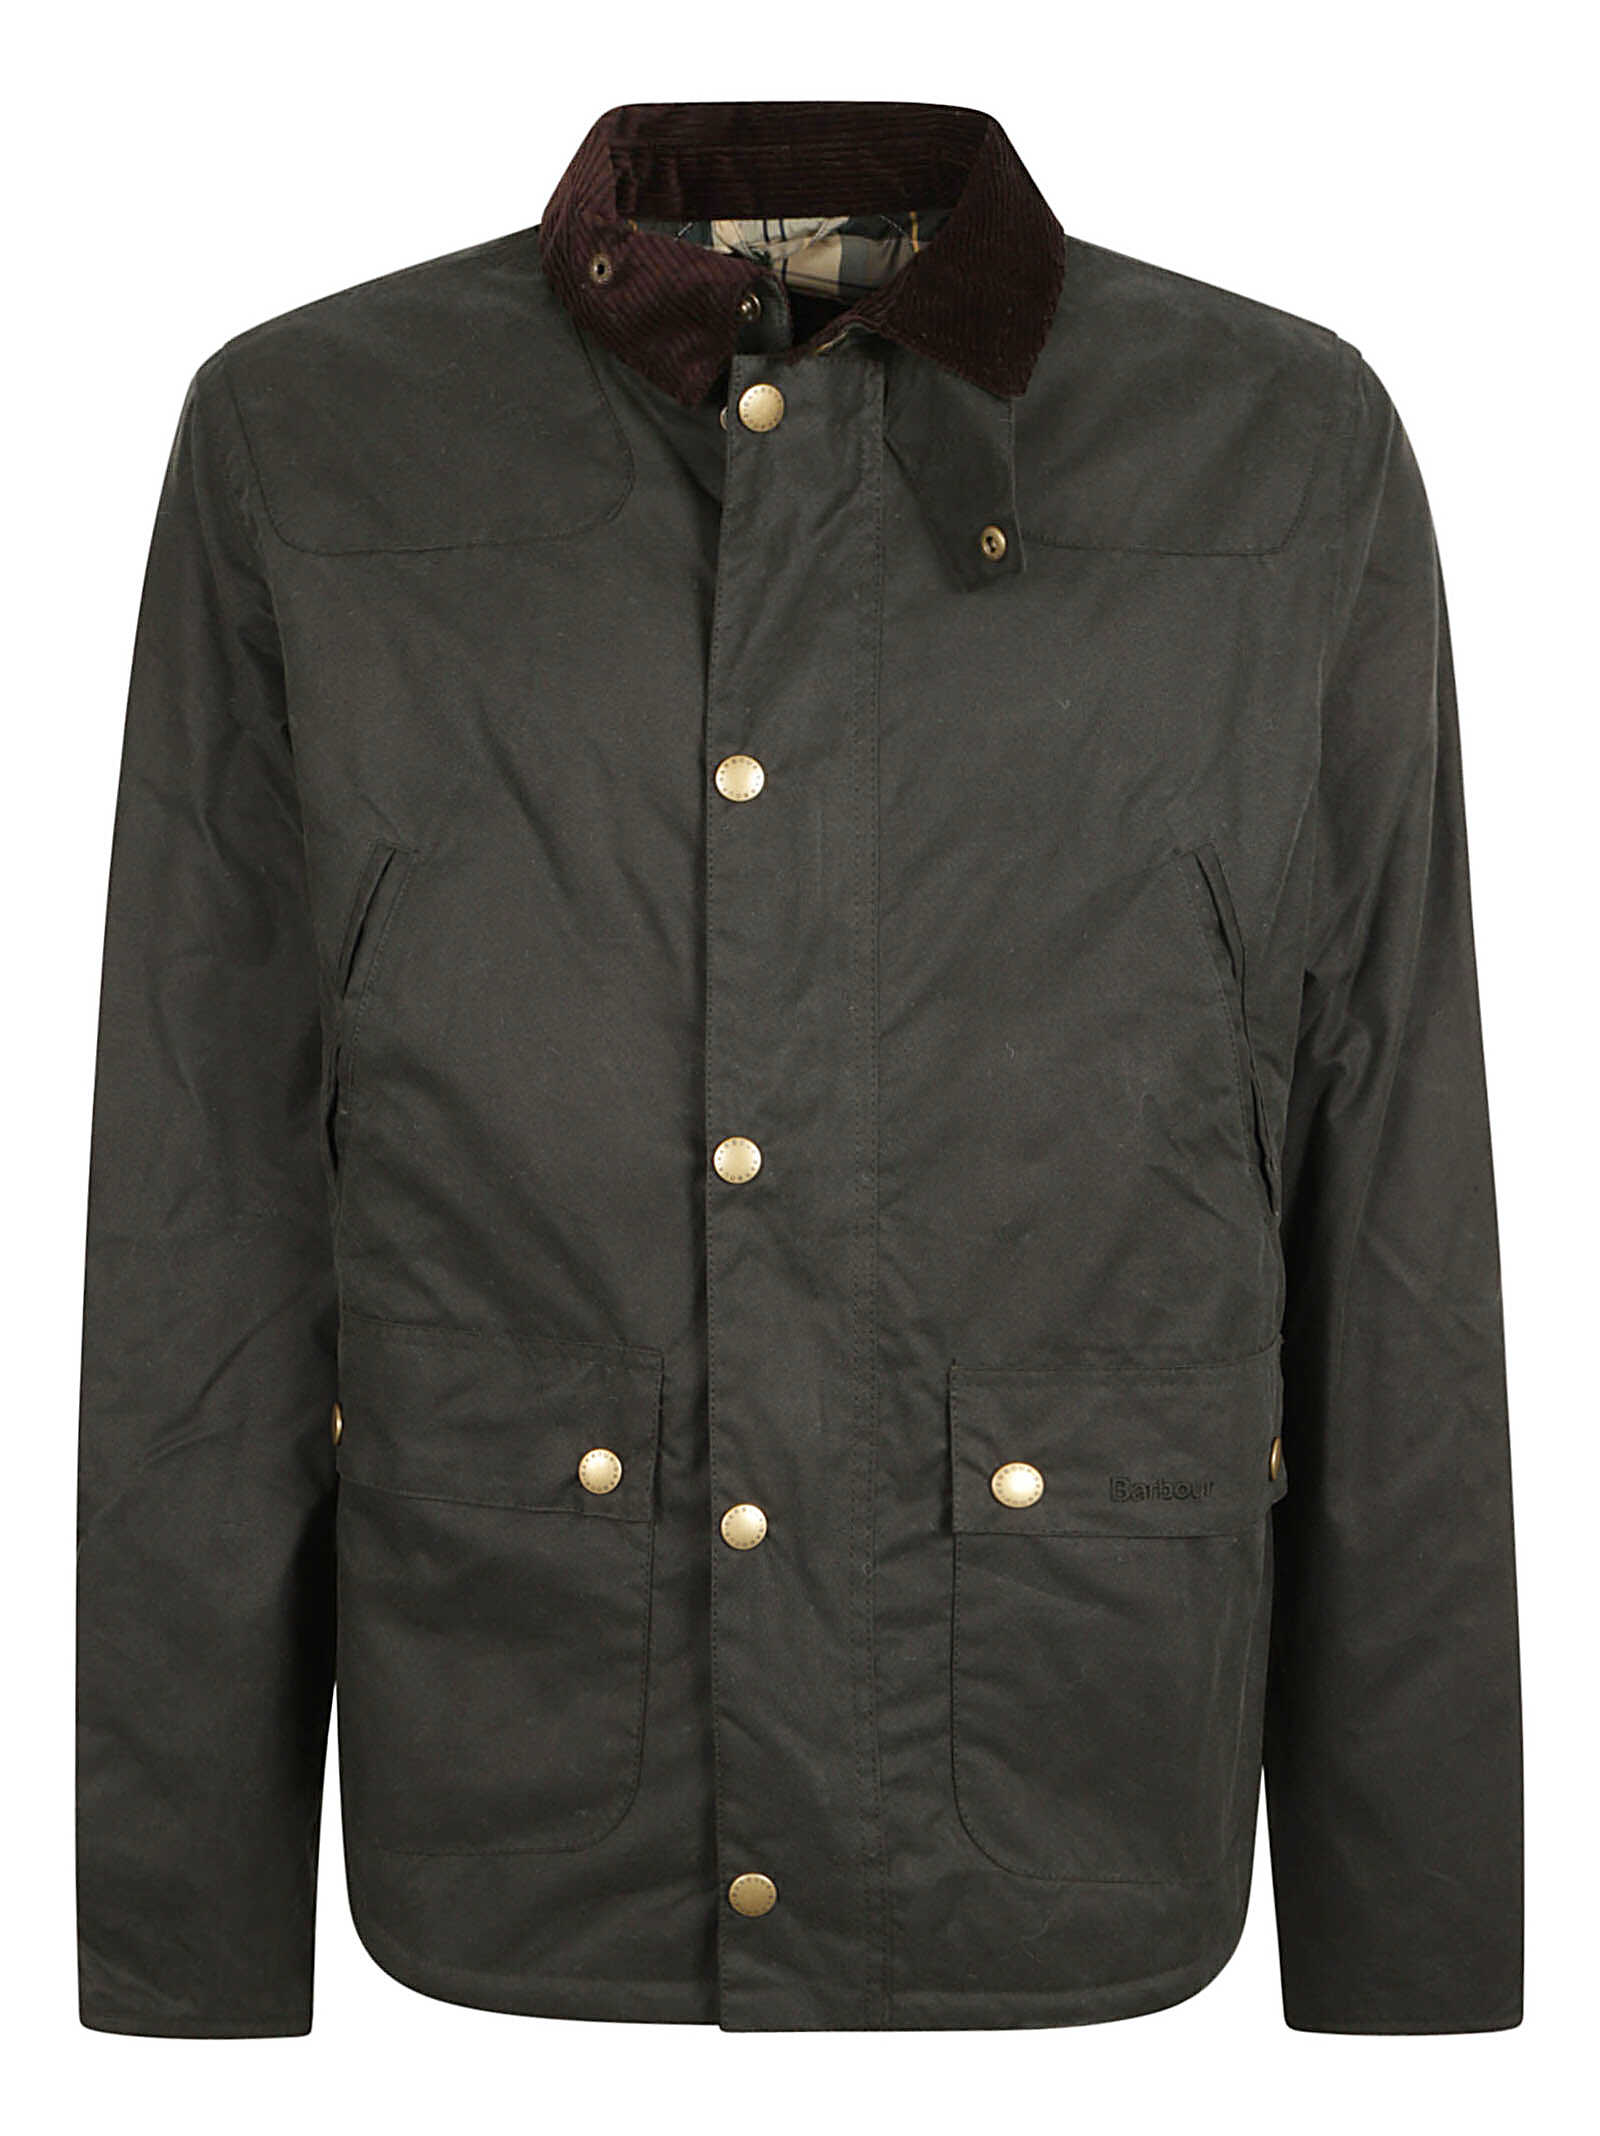 Barbour Jackets N/A b-mall.ro